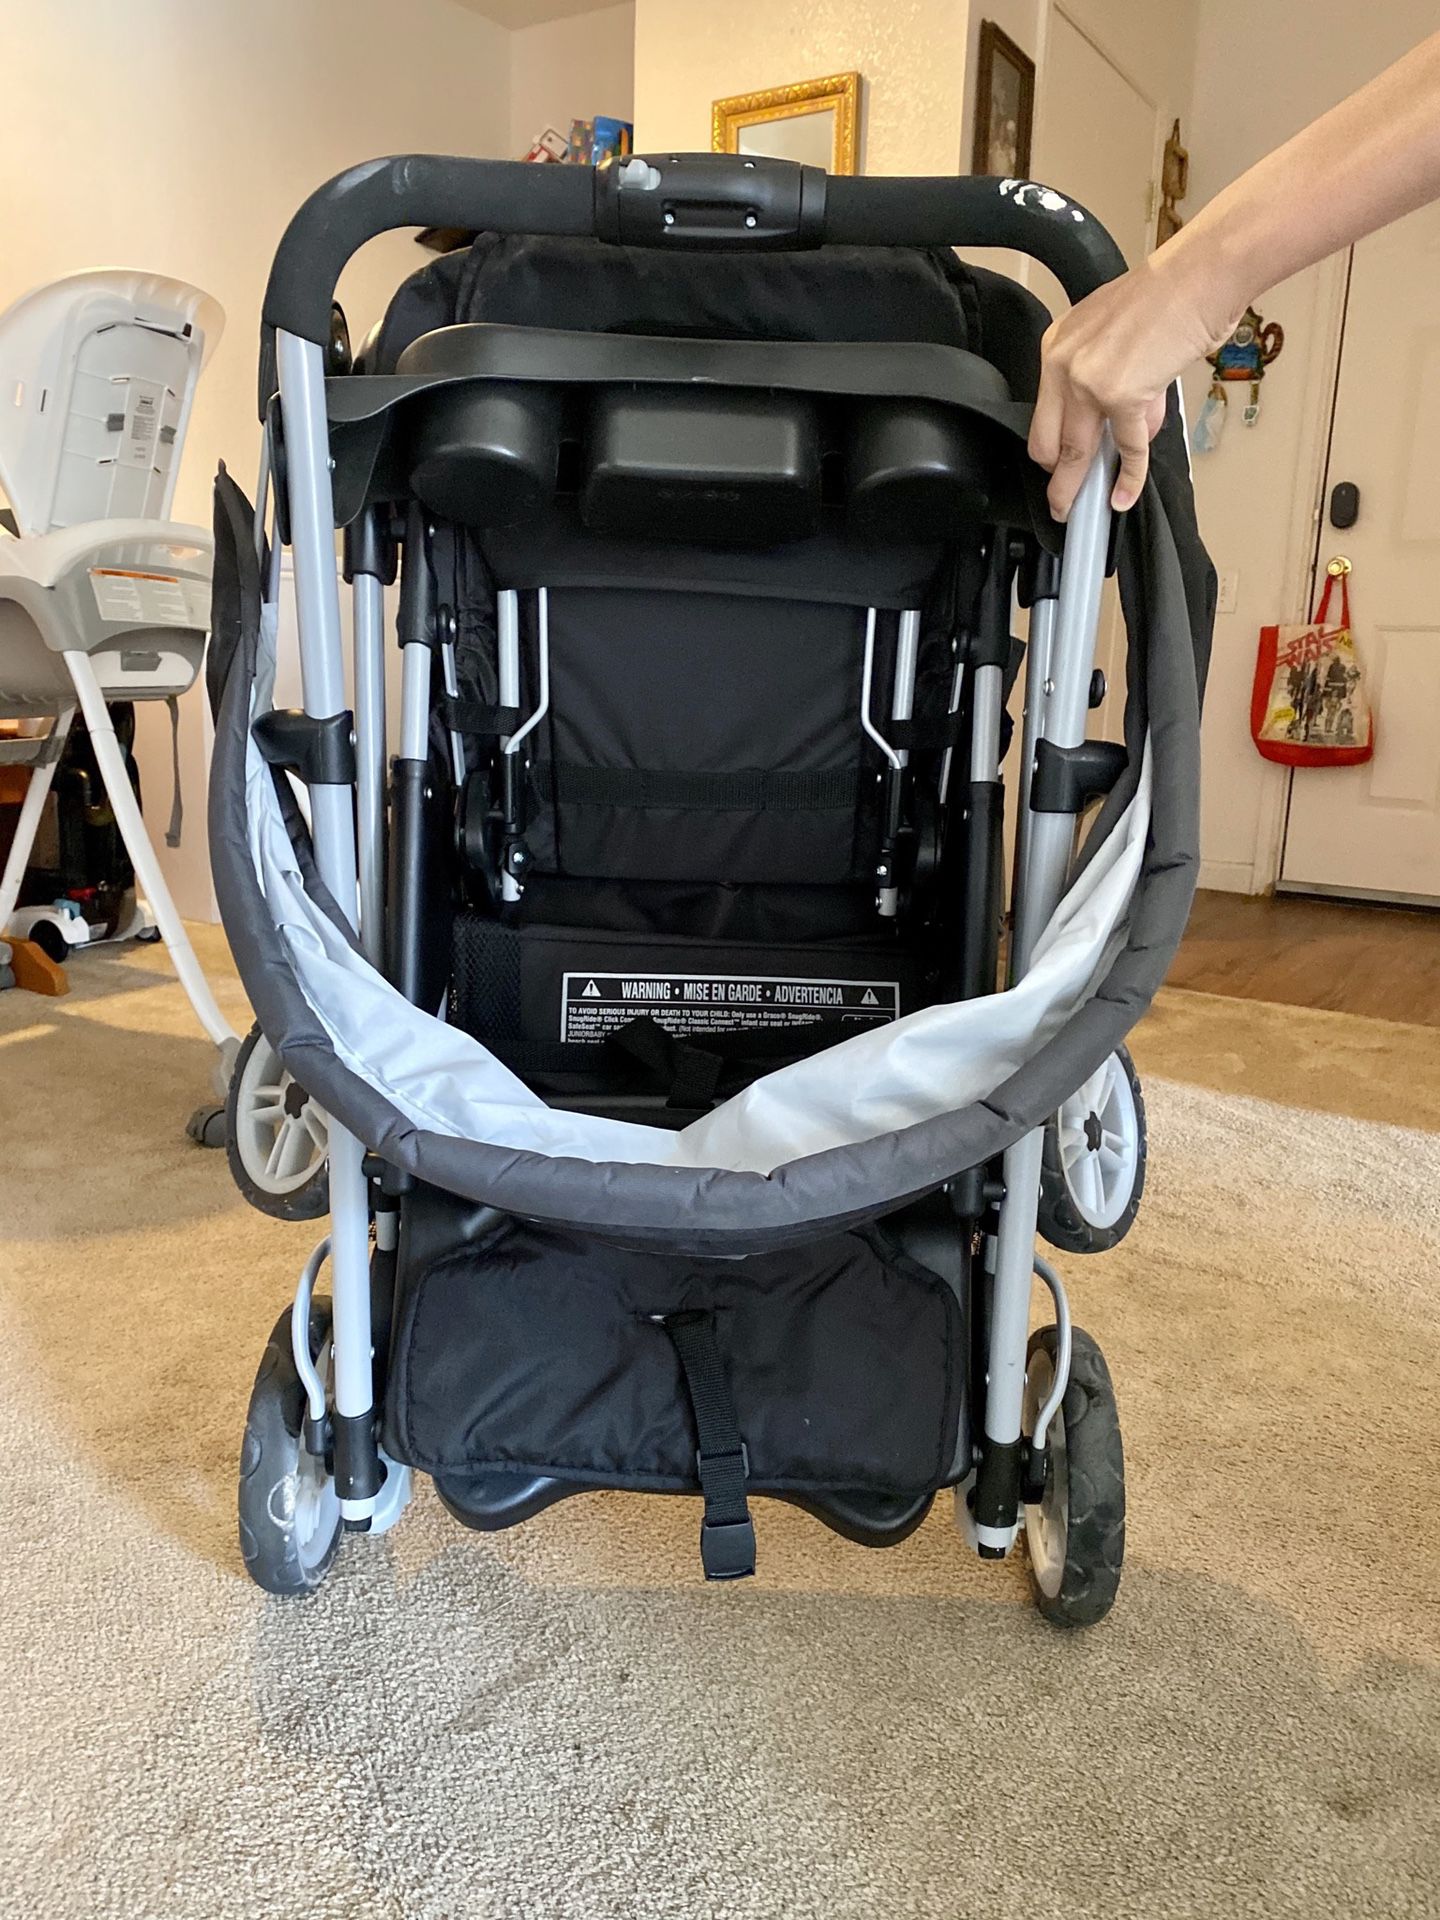 Grayco click connect sit and stand double stroller